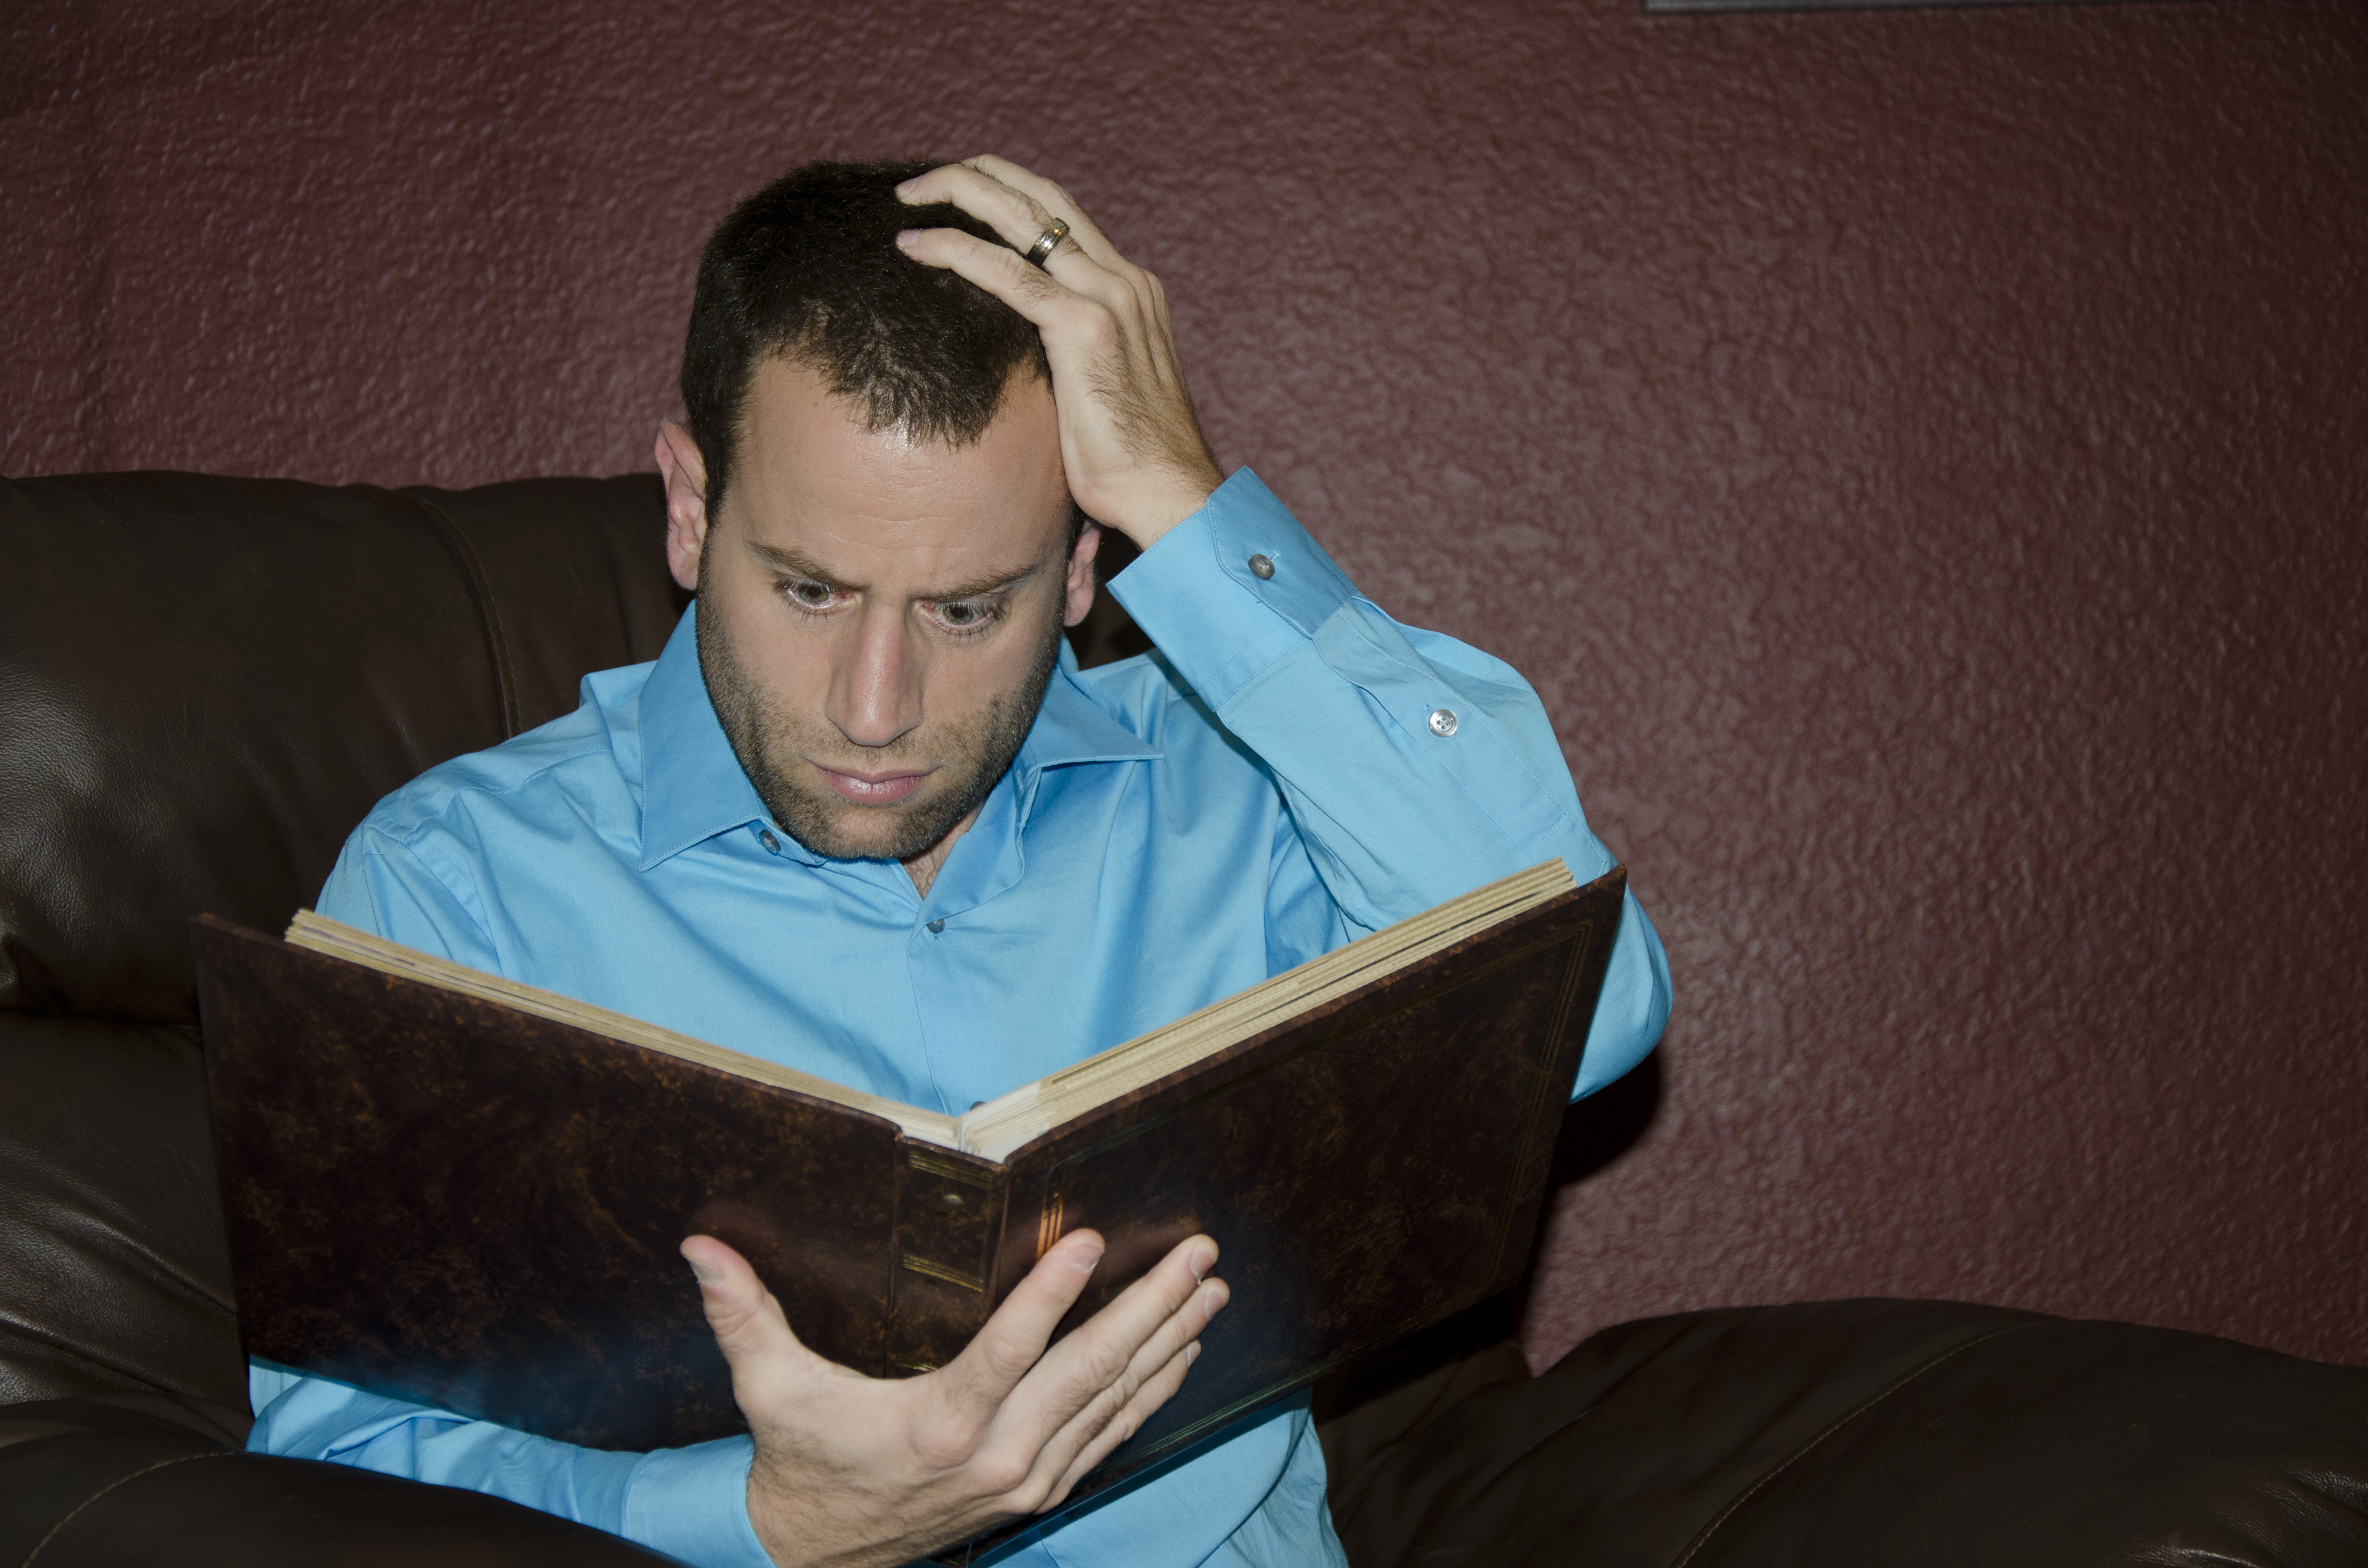 A shocked man looking at an old photo album | Source: Shutterstock